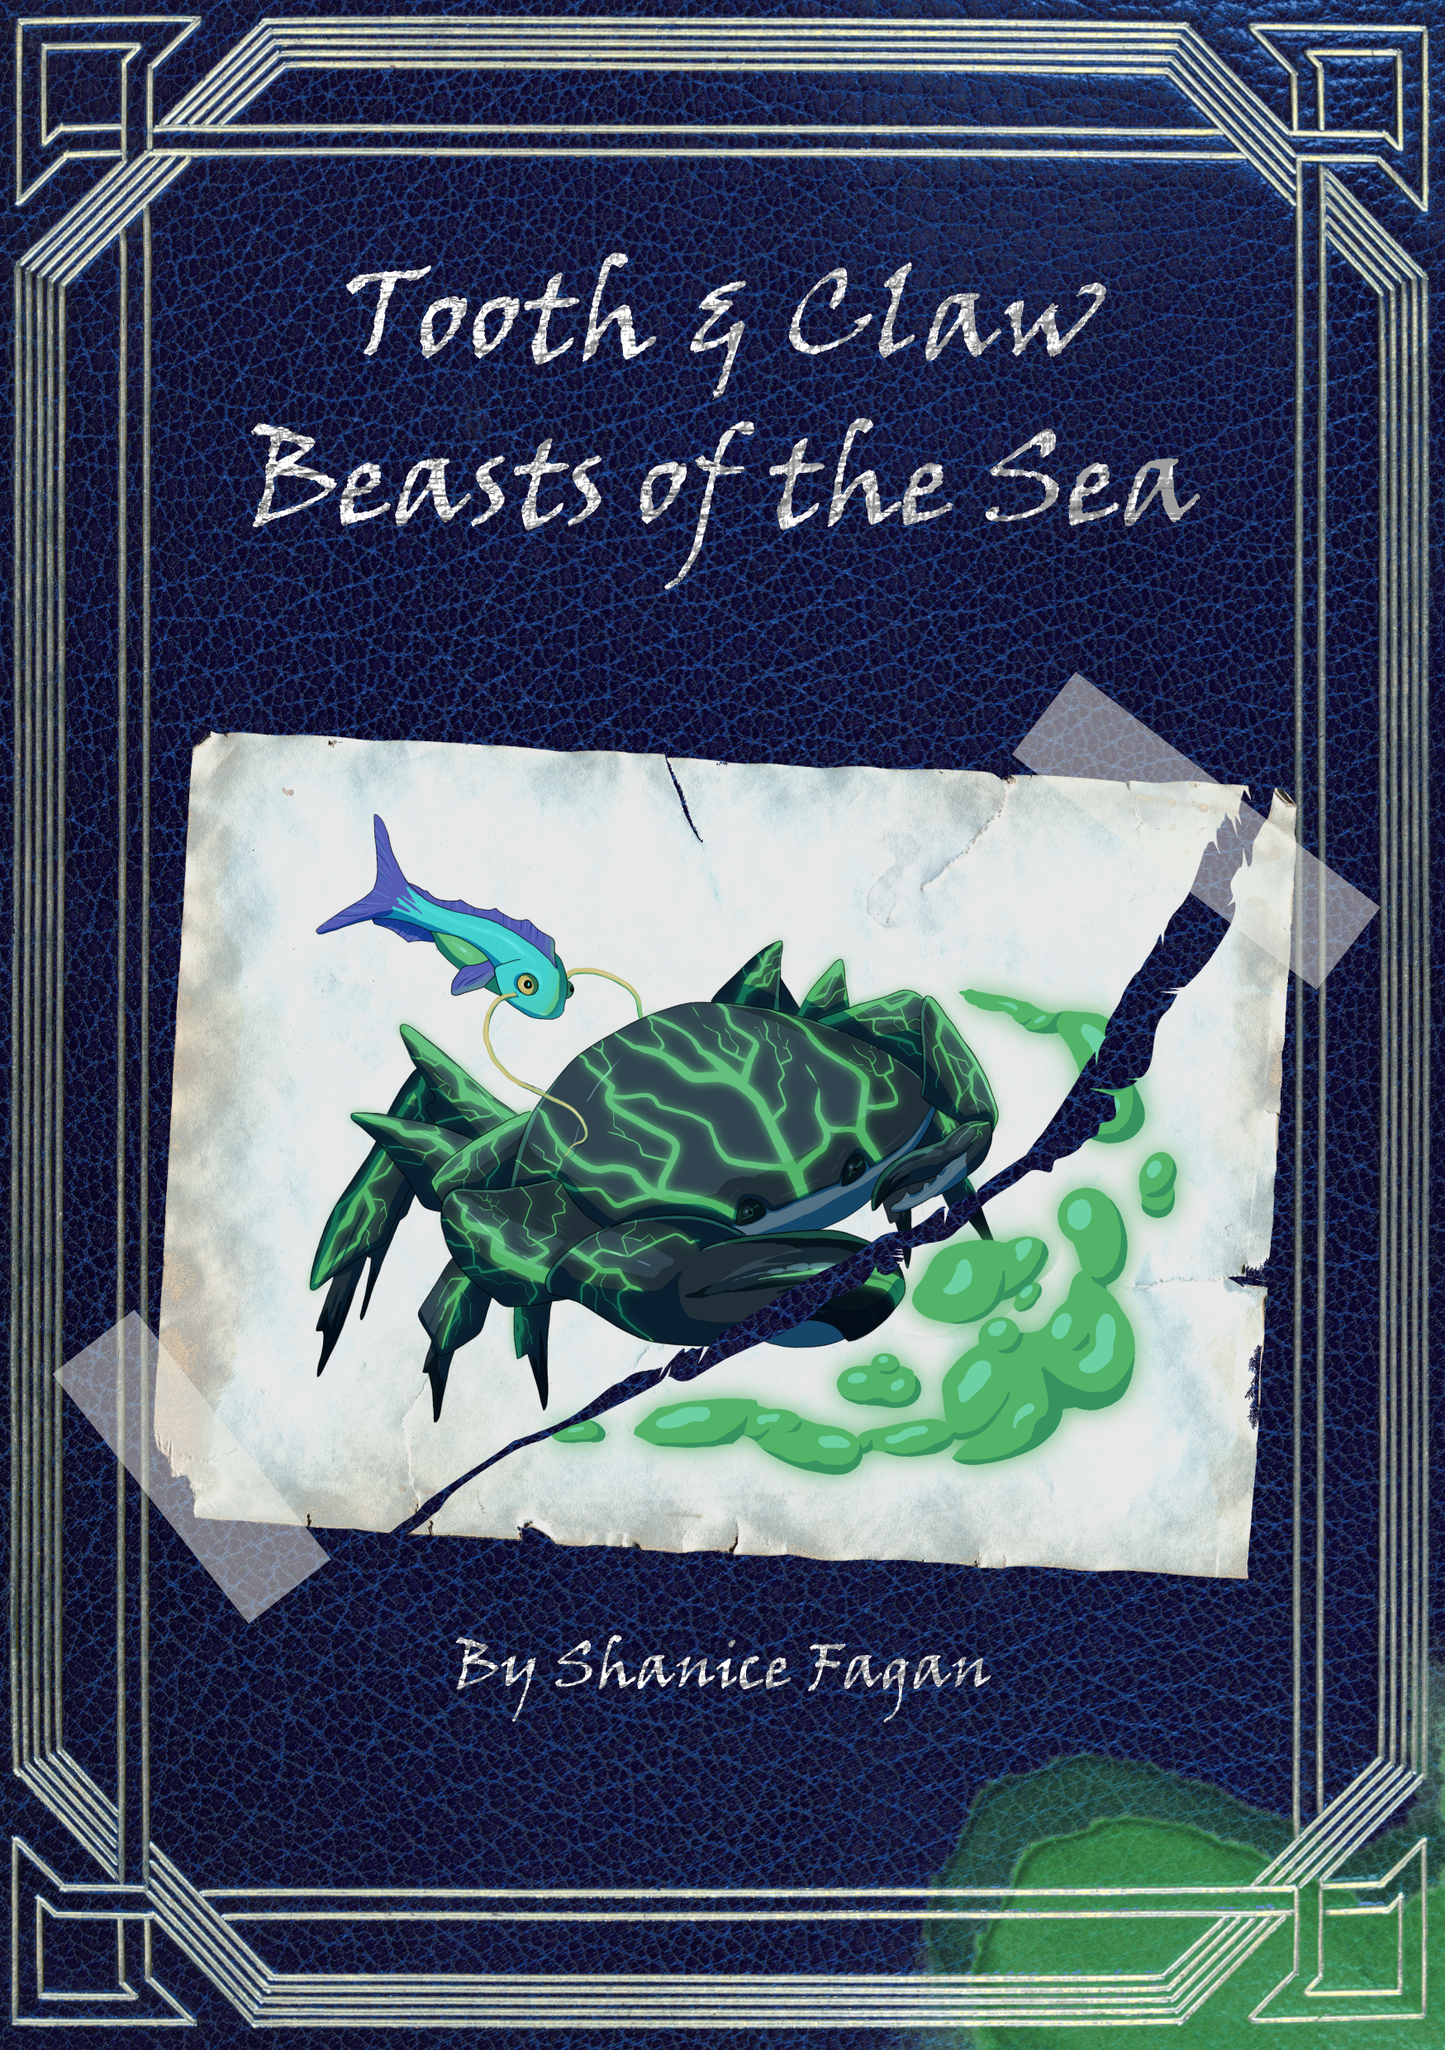 Tooth & Claw and Beasts of the Sea